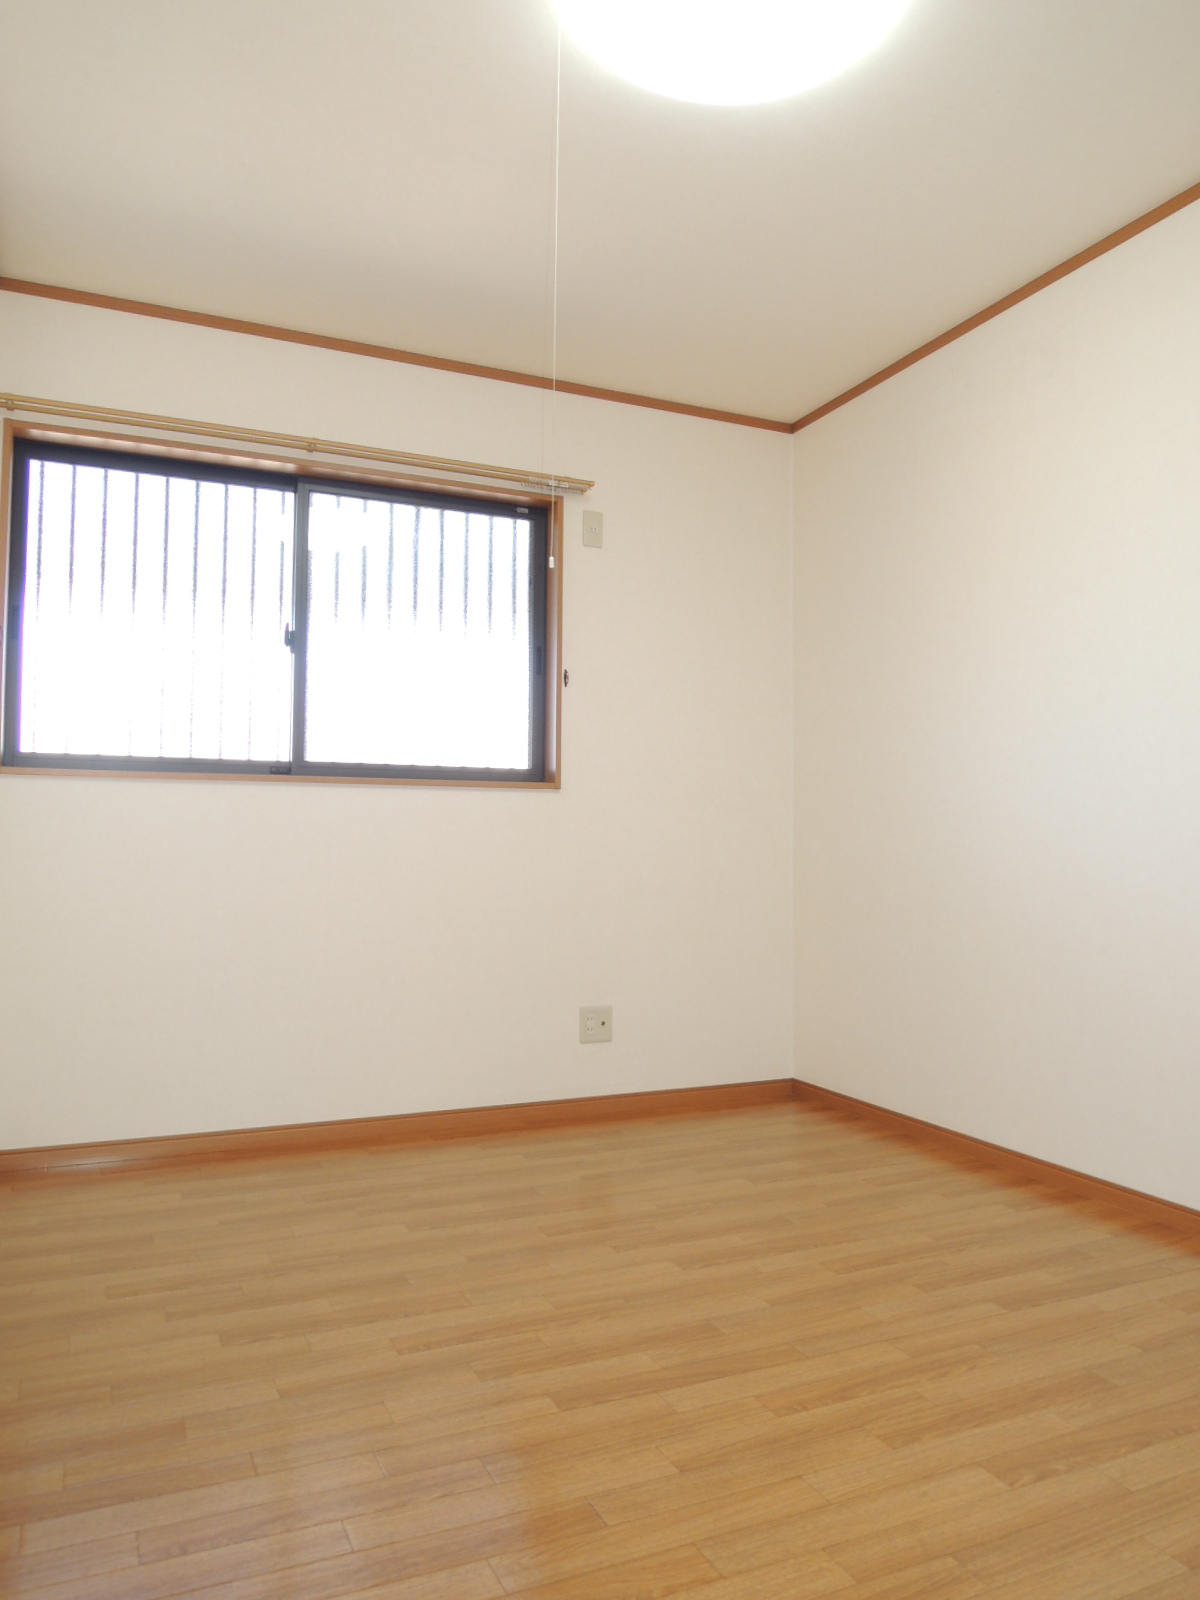 Other room space. Western-style room is a 6-mat flooring